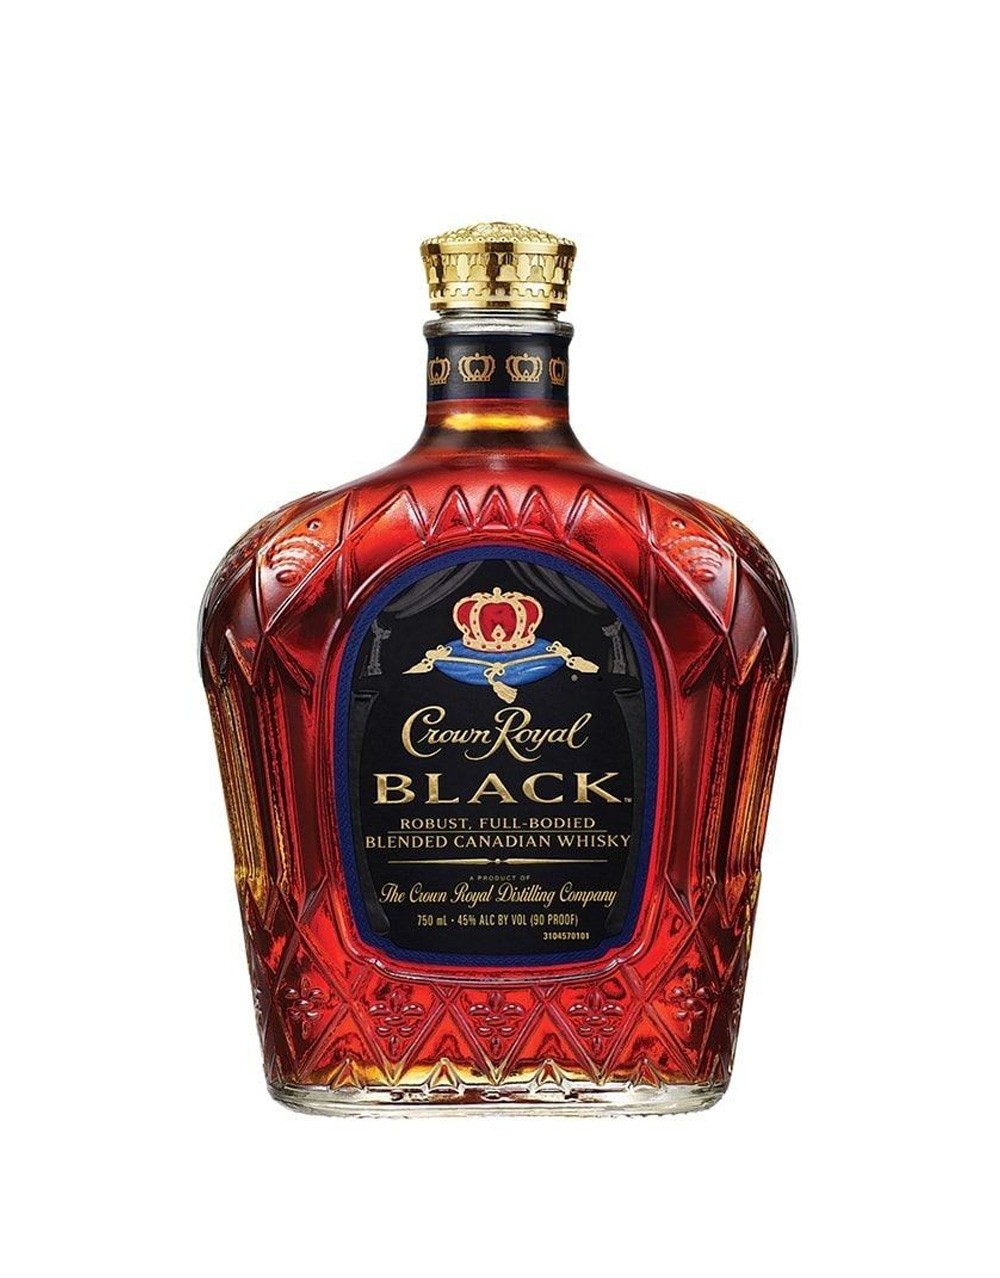 Crown Royal Black Whisky | Buy Online or Send as a Gift